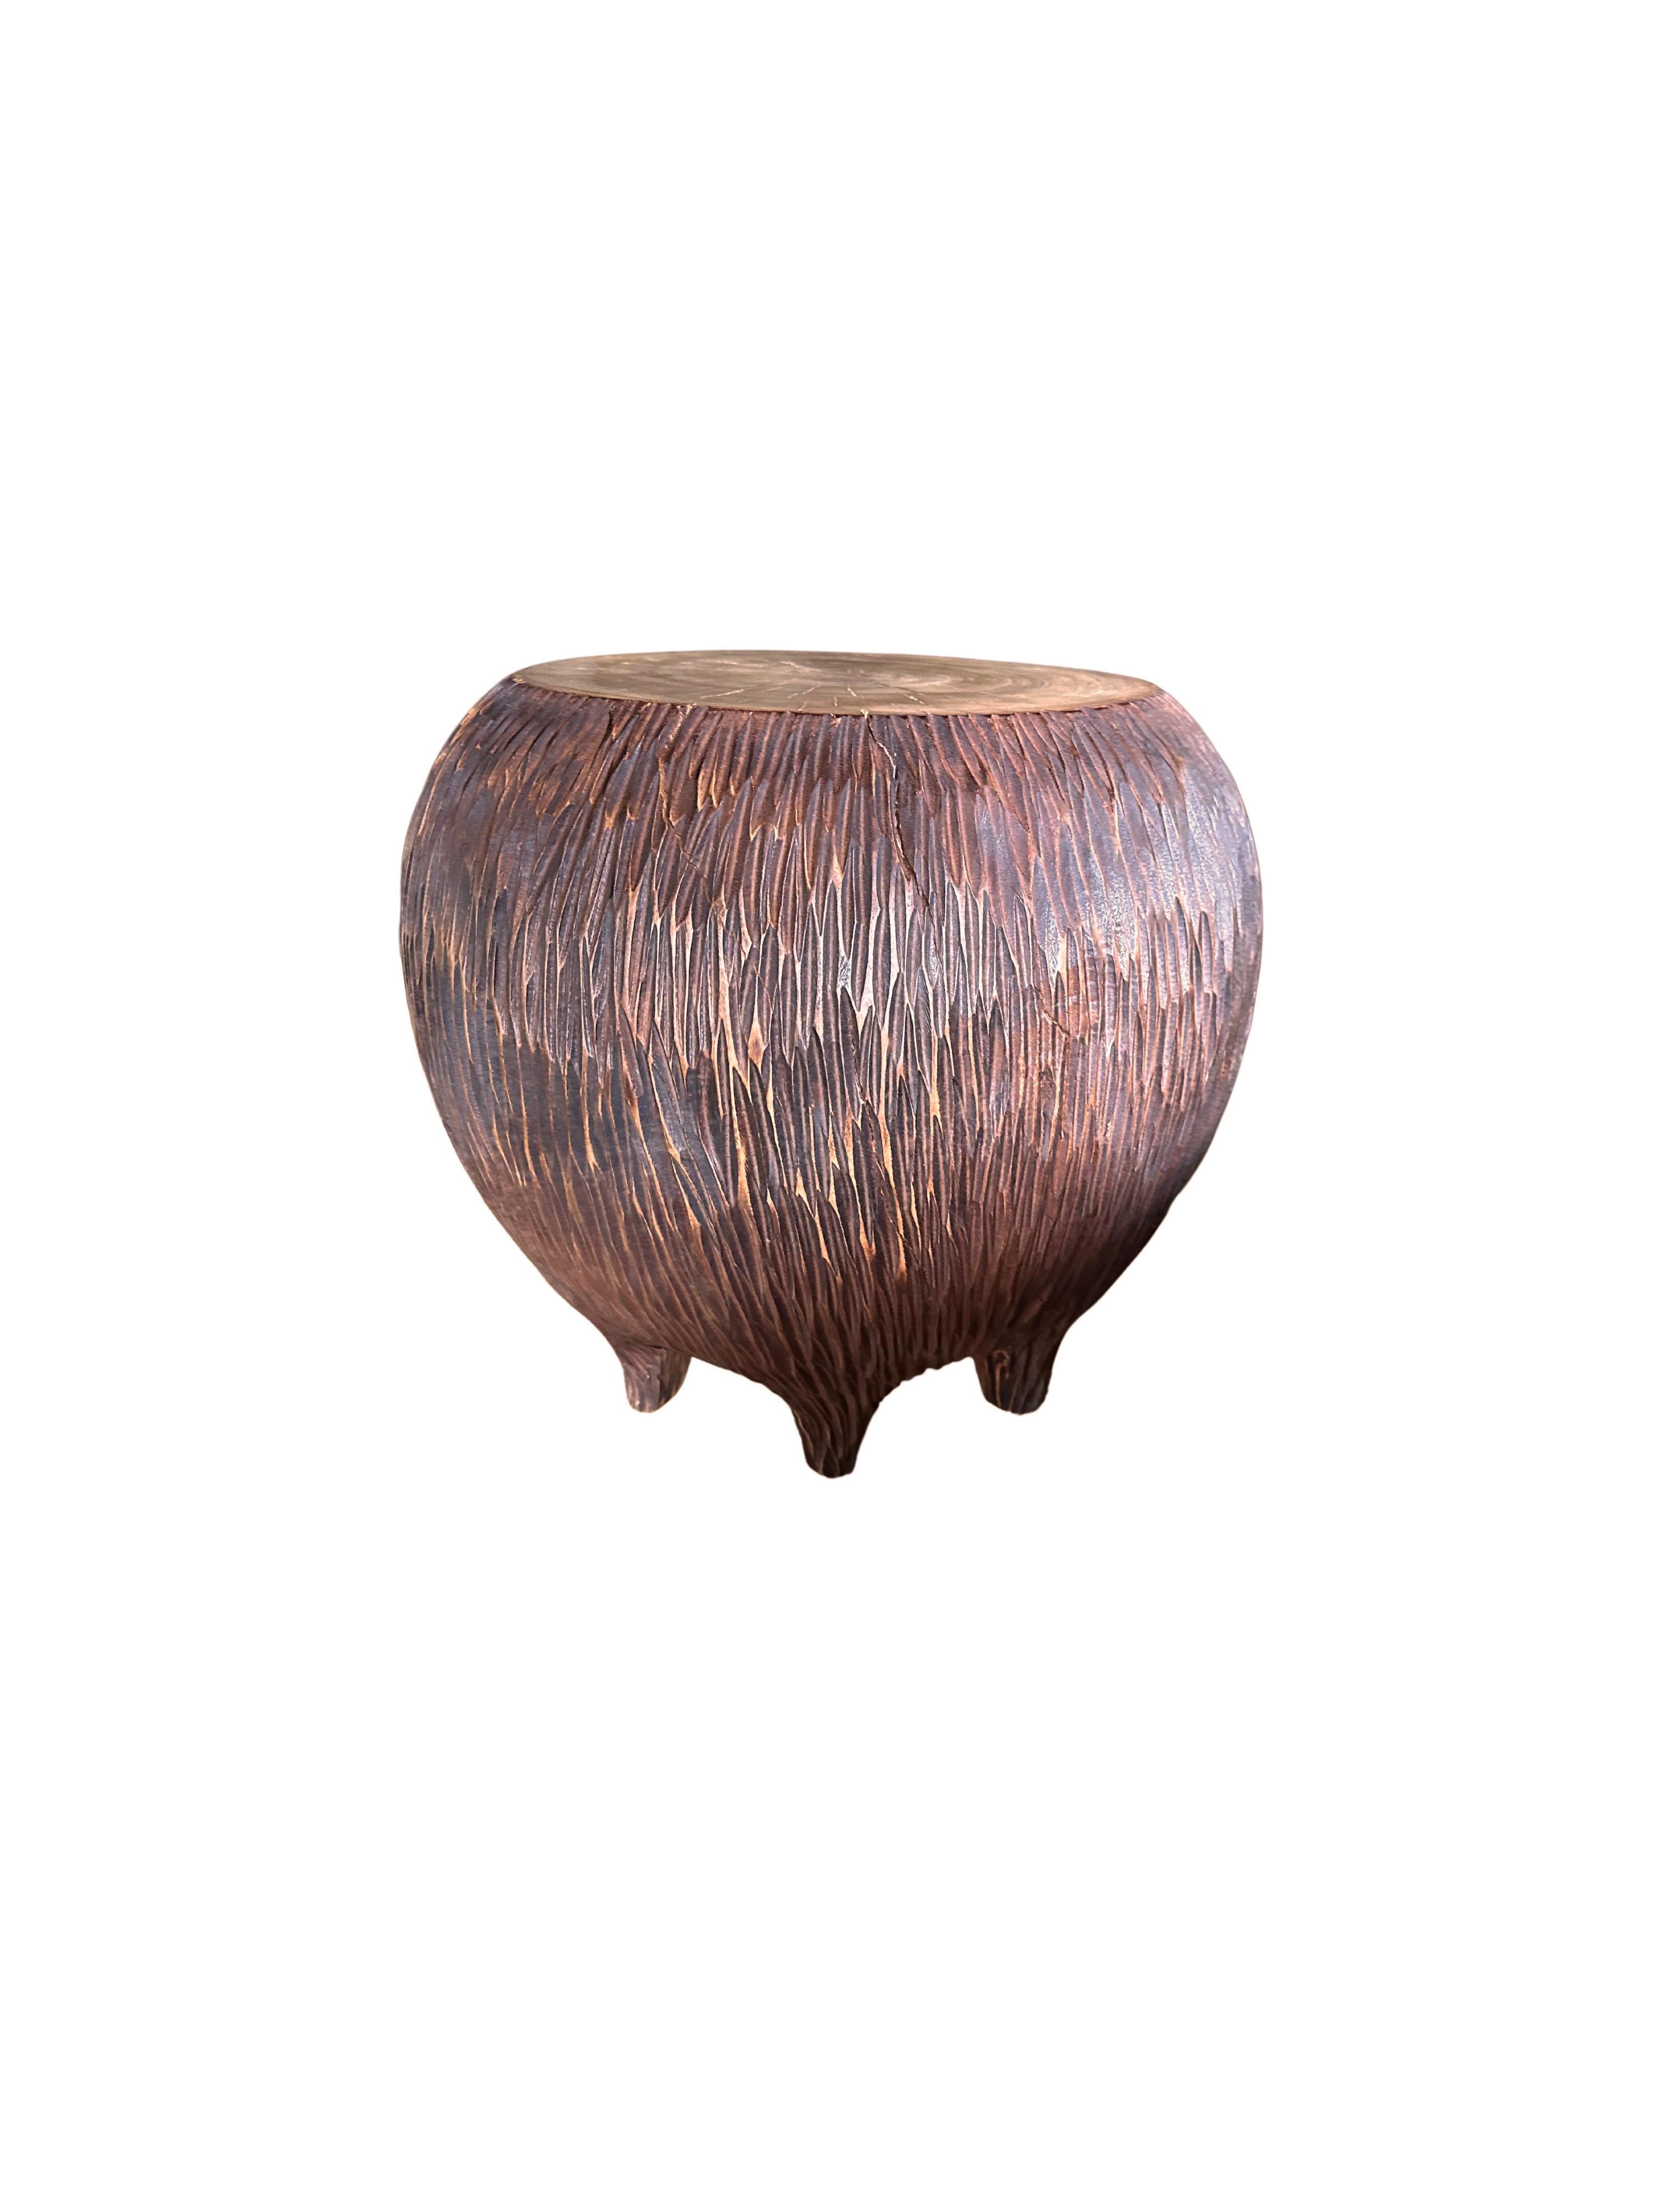 An elegantly rounded, sculptural side table crafted from a single block of mango wood. This table is elevated by 6 shallow legs that blend with the overall form. Unique to this table is the hand-hewn detailing on all sides. The table top was sanded